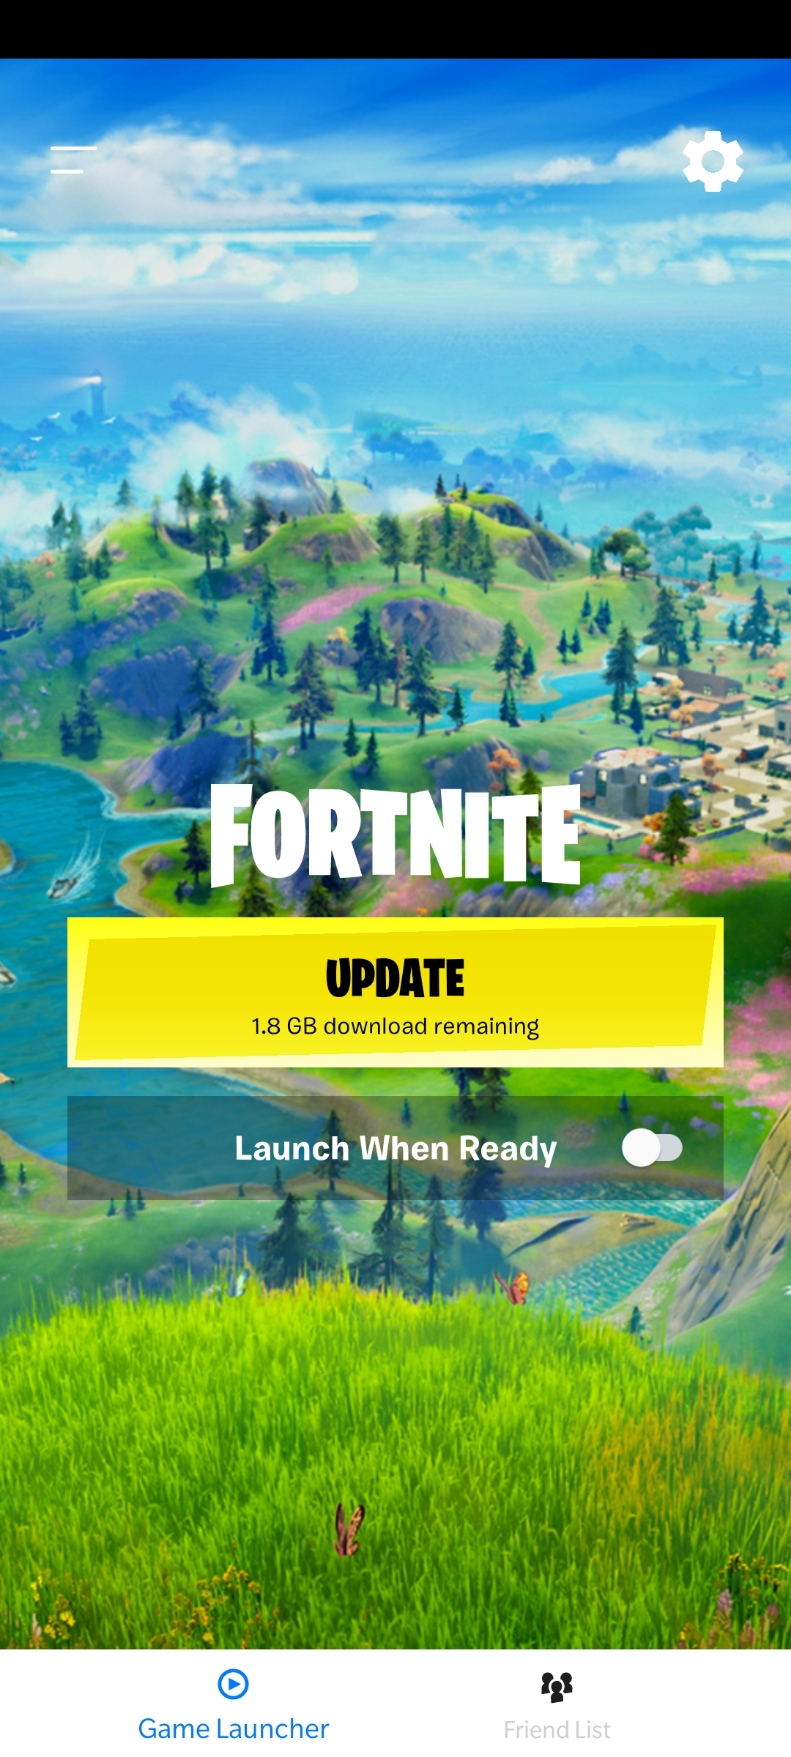 Fortnite Launcher For Android How To Update Fortnite On The Epic Games Launcher For Android